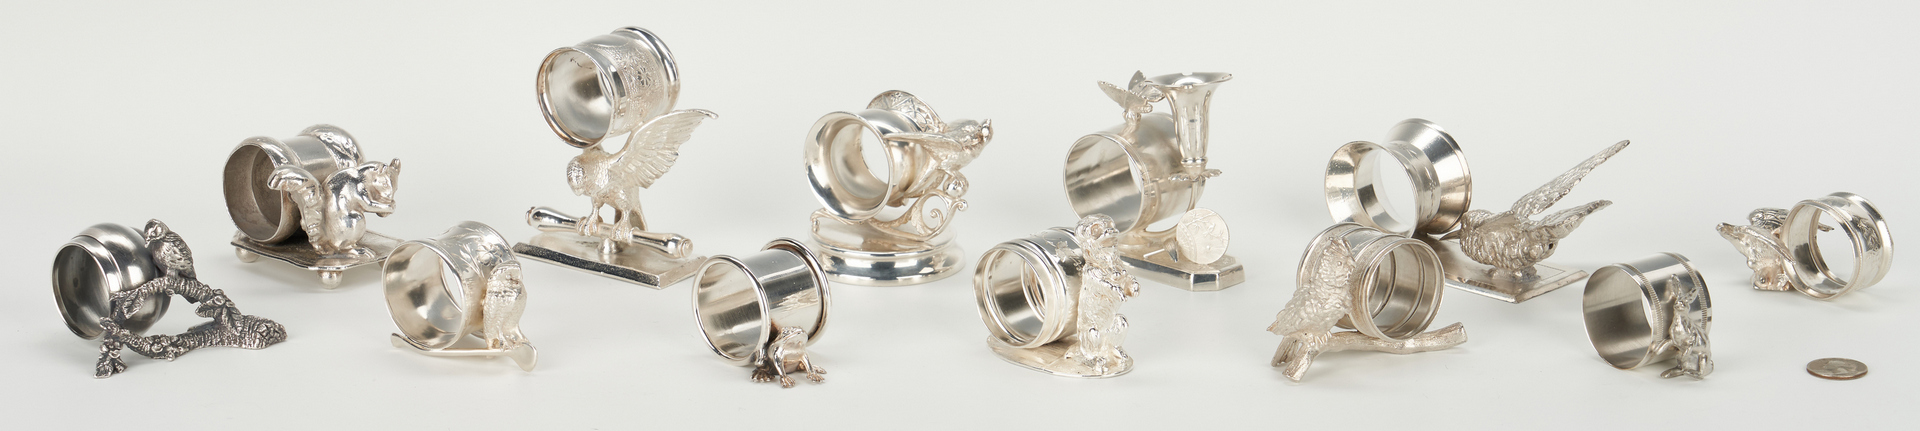 Lot 251: 12 Silverplated Napkin Rings, incl. Animals